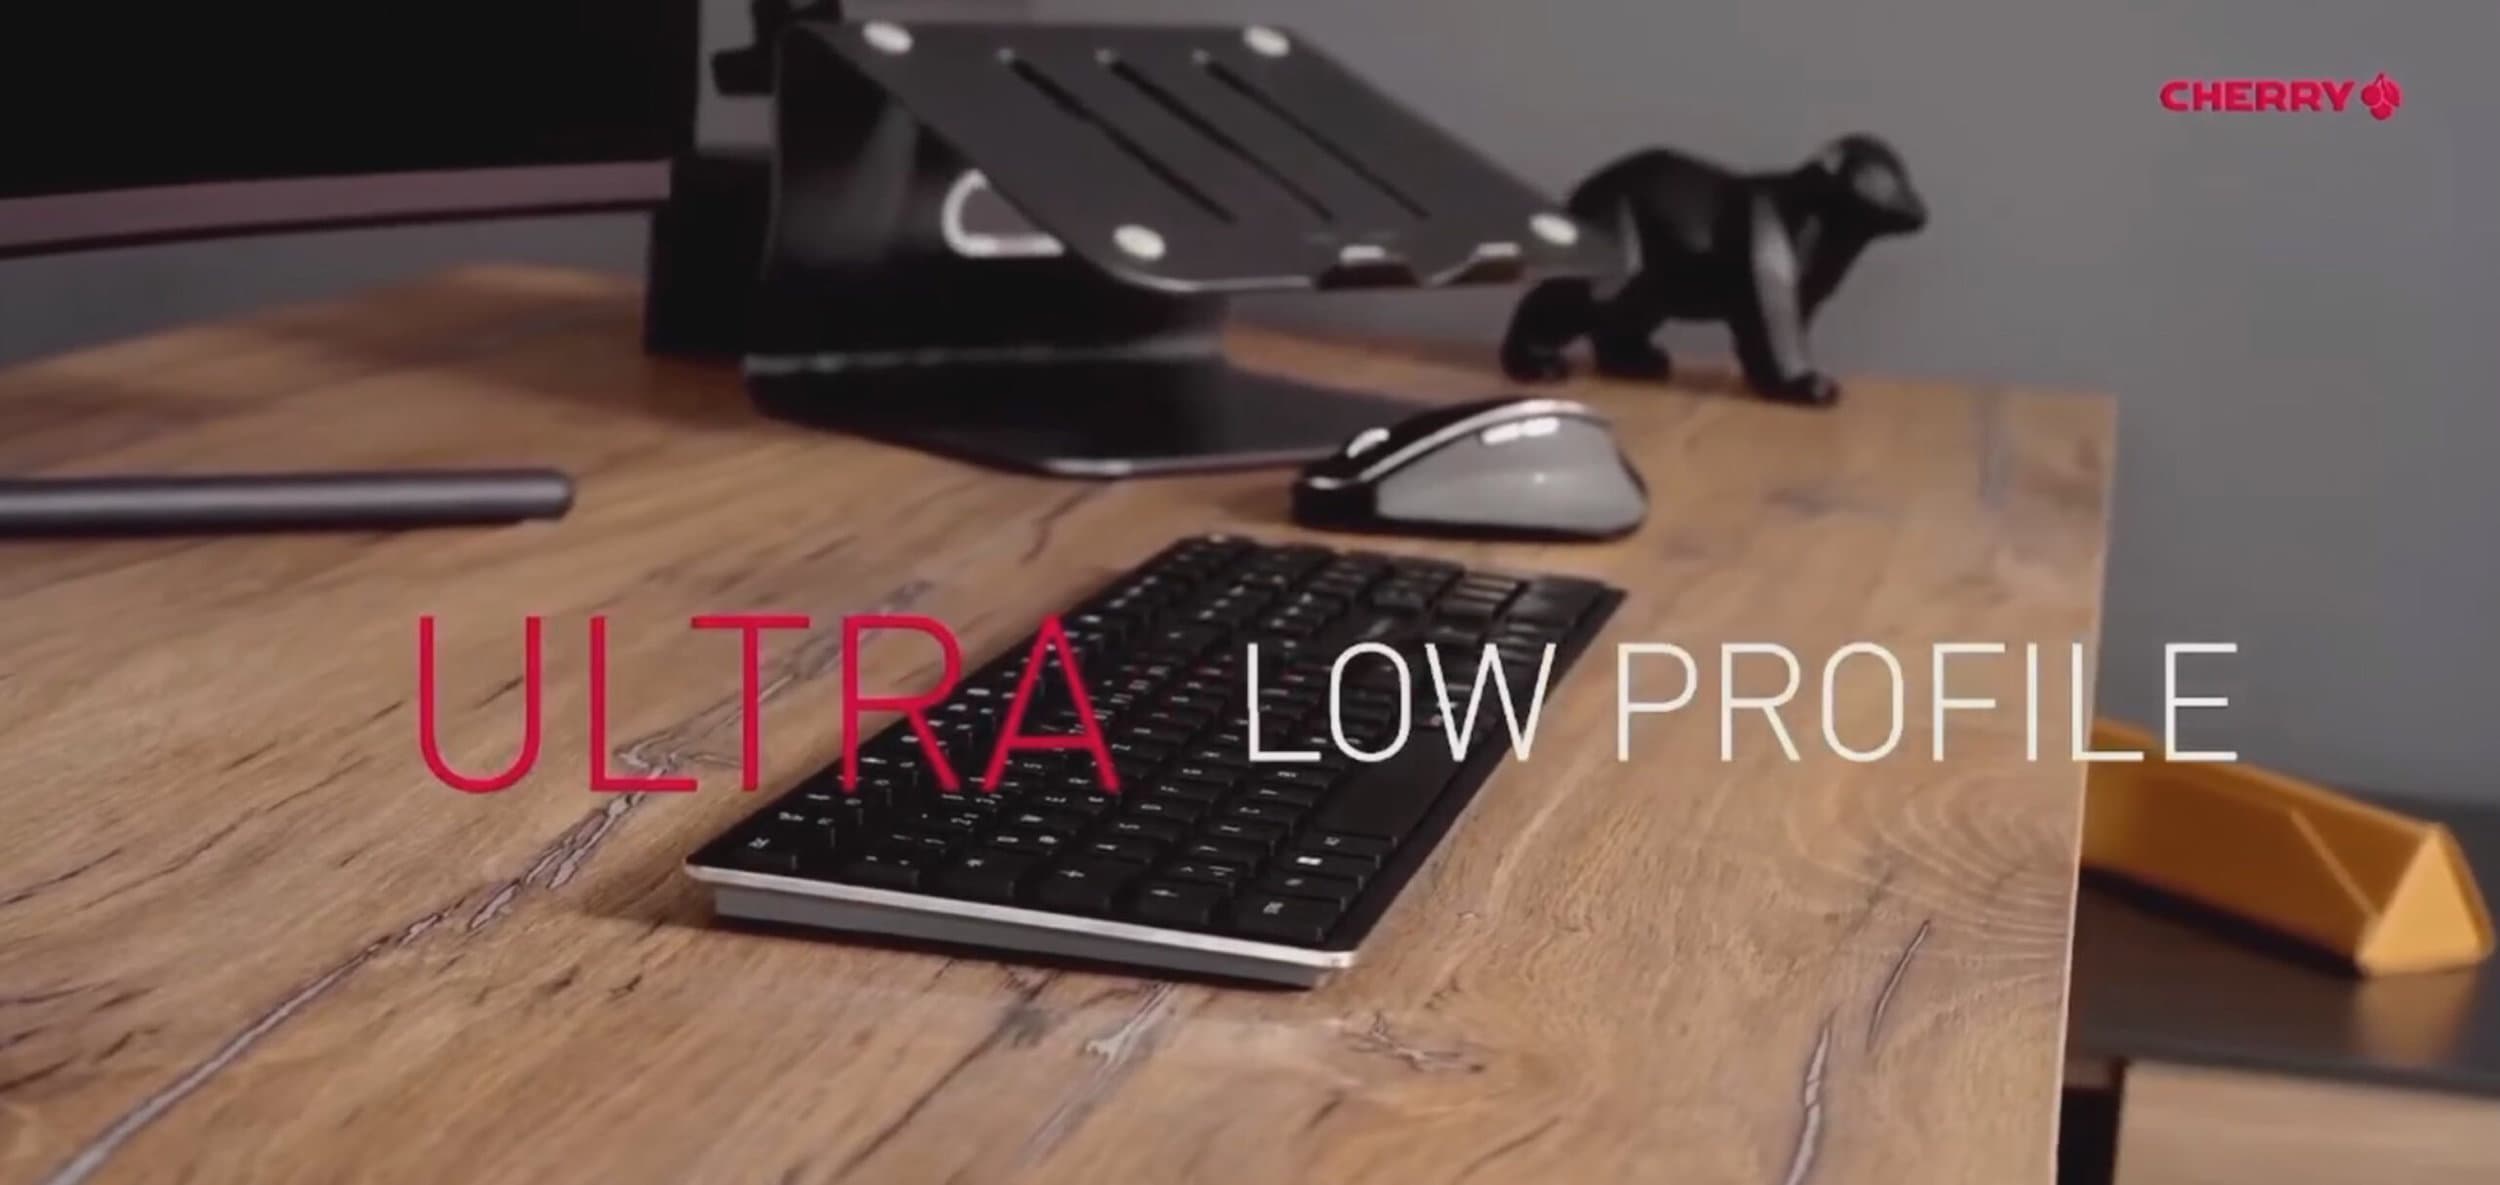 Cherry KW X ULP keyboard announced with MX ultra-low profile tactile mechanical keys